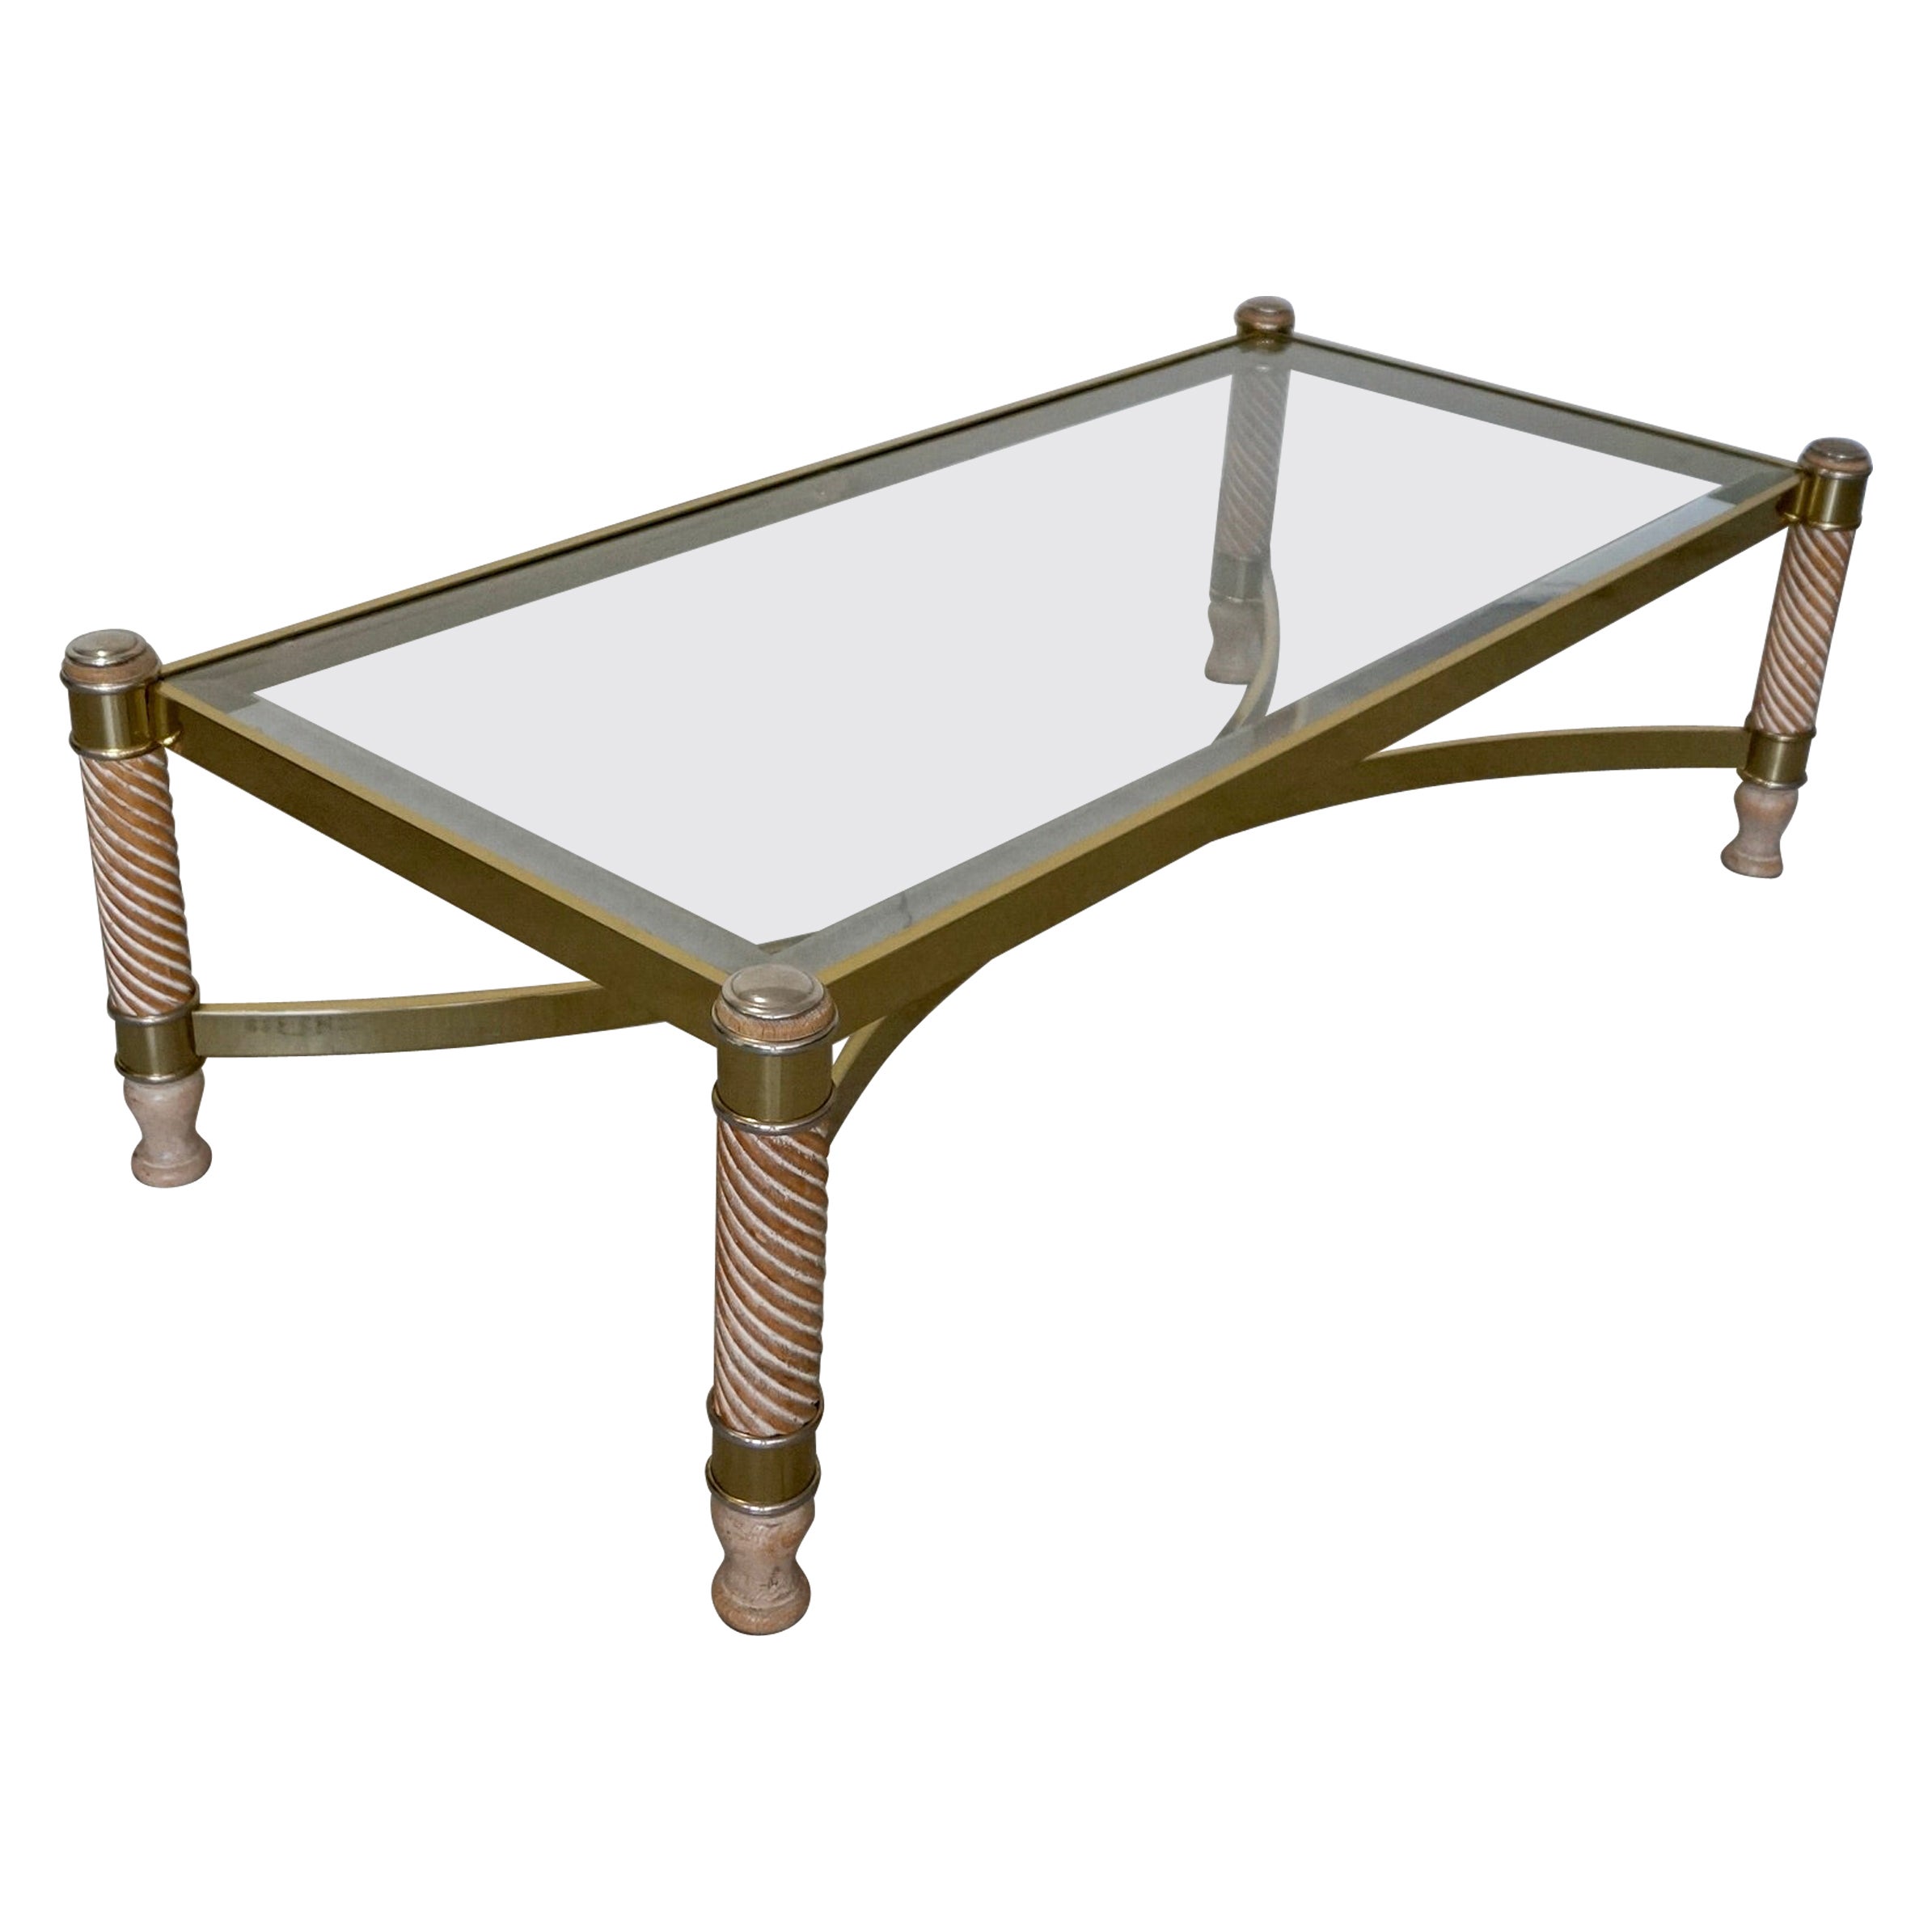 1970's Hollywood Regency Turned Wood, Brass, & Glass Coffee Table